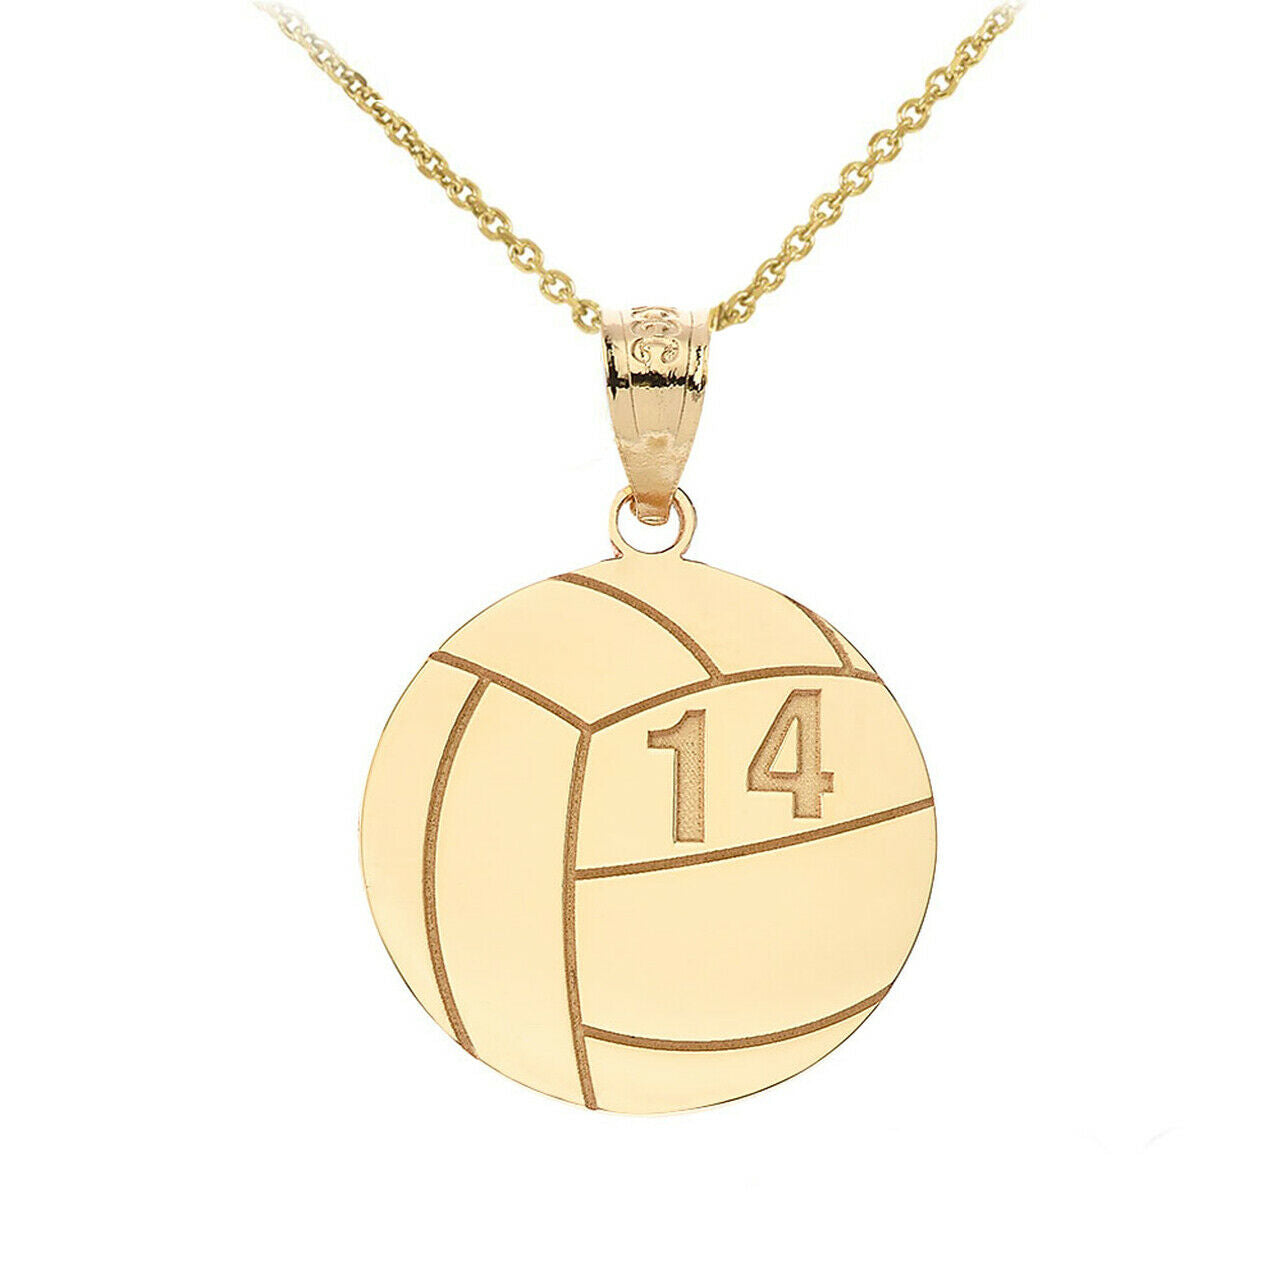 Personalized Engrave Name Number 10k 14k Solid Gold Volleyball Pendant Necklace